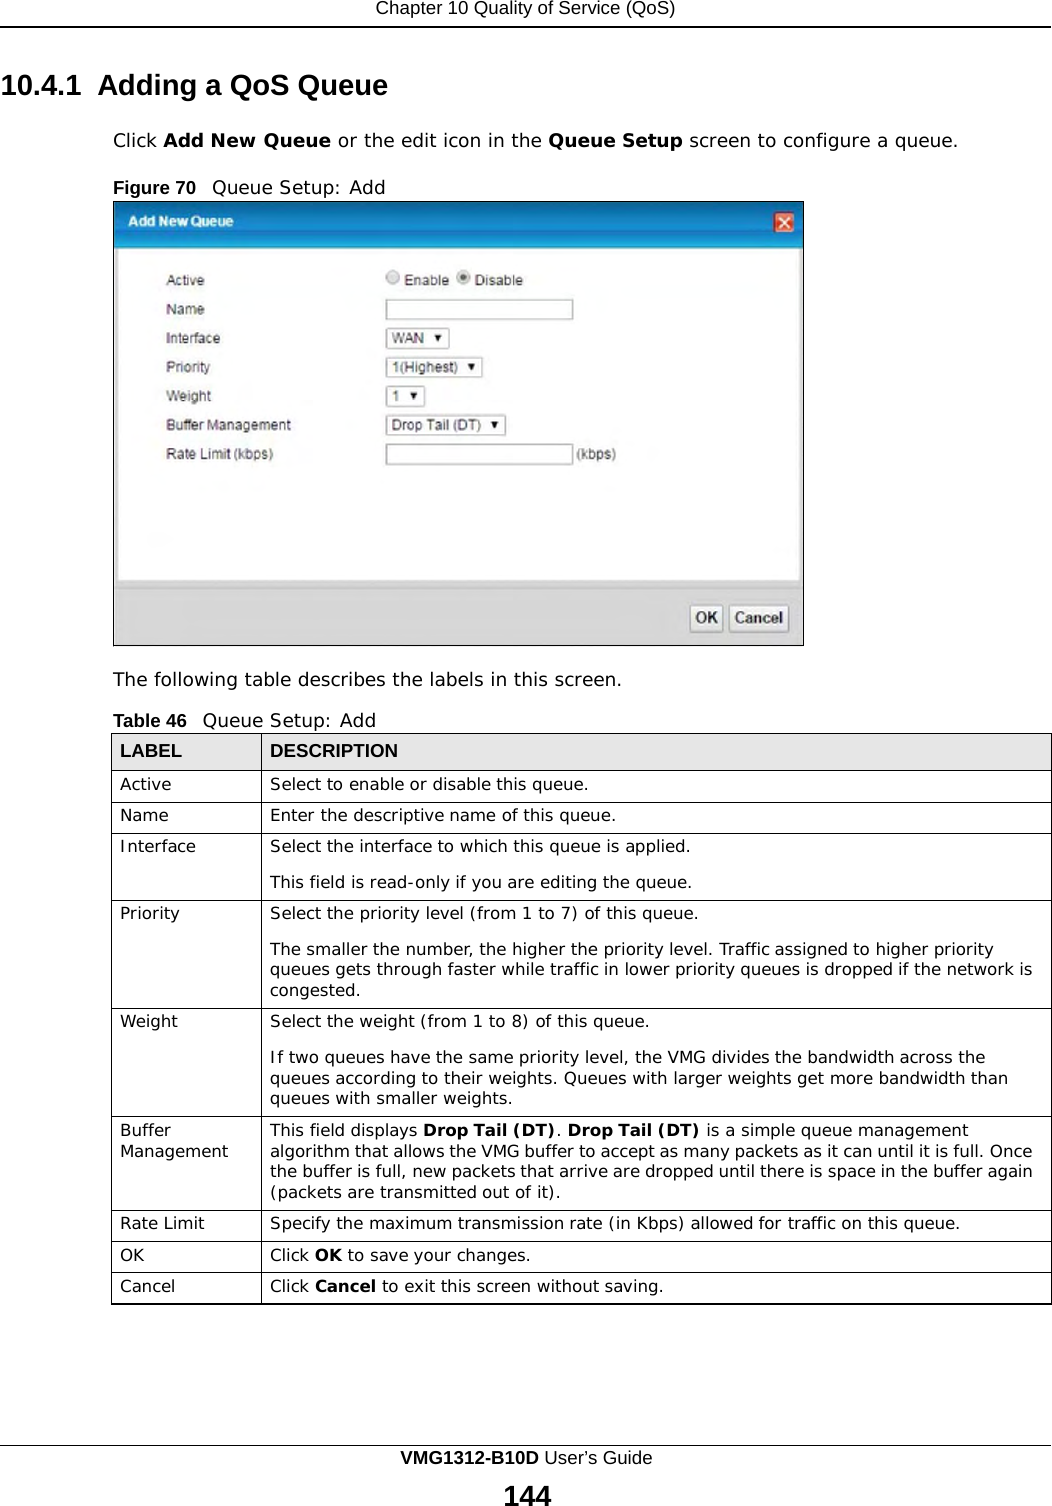 Chapter 10 Quality of Service (QoS)      10.4.1  Adding a QoS Queue  Click Add New Queue or the edit icon in the Queue Setup screen to configure a queue.  Figure 70   Queue Setup: Add                       The following table describes the labels in this screen.  Table 46   Queue Setup: Add  LABEL DESCRIPTION Active Select to enable or disable this queue. Name Enter the descriptive name of this queue. Interface Select the interface to which this queue is applied.  This field is read-only if you are editing the queue. Priority Select the priority level (from 1 to 7) of this queue.  The smaller the number, the higher the priority level. Traffic assigned to higher priority queues gets through faster while traffic in lower priority queues is dropped if the network is congested. Weight Select the weight (from 1 to 8) of this queue.  If two queues have the same priority level, the VMG divides the bandwidth across the queues according to their weights. Queues with larger weights get more bandwidth than queues with smaller weights. Buffer Management This field displays Drop Tail (DT). Drop Tail (DT) is a simple queue management algorithm that allows the VMG buffer to accept as many packets as it can until it is full. Once the buffer is full, new packets that arrive are dropped until there is space in the buffer again (packets are transmitted out of it). Rate Limit Specify the maximum transmission rate (in Kbps) allowed for traffic on this queue. OK Click OK to save your changes. Cancel Click Cancel to exit this screen without saving. VMG1312-B10D User’s Guide 144  